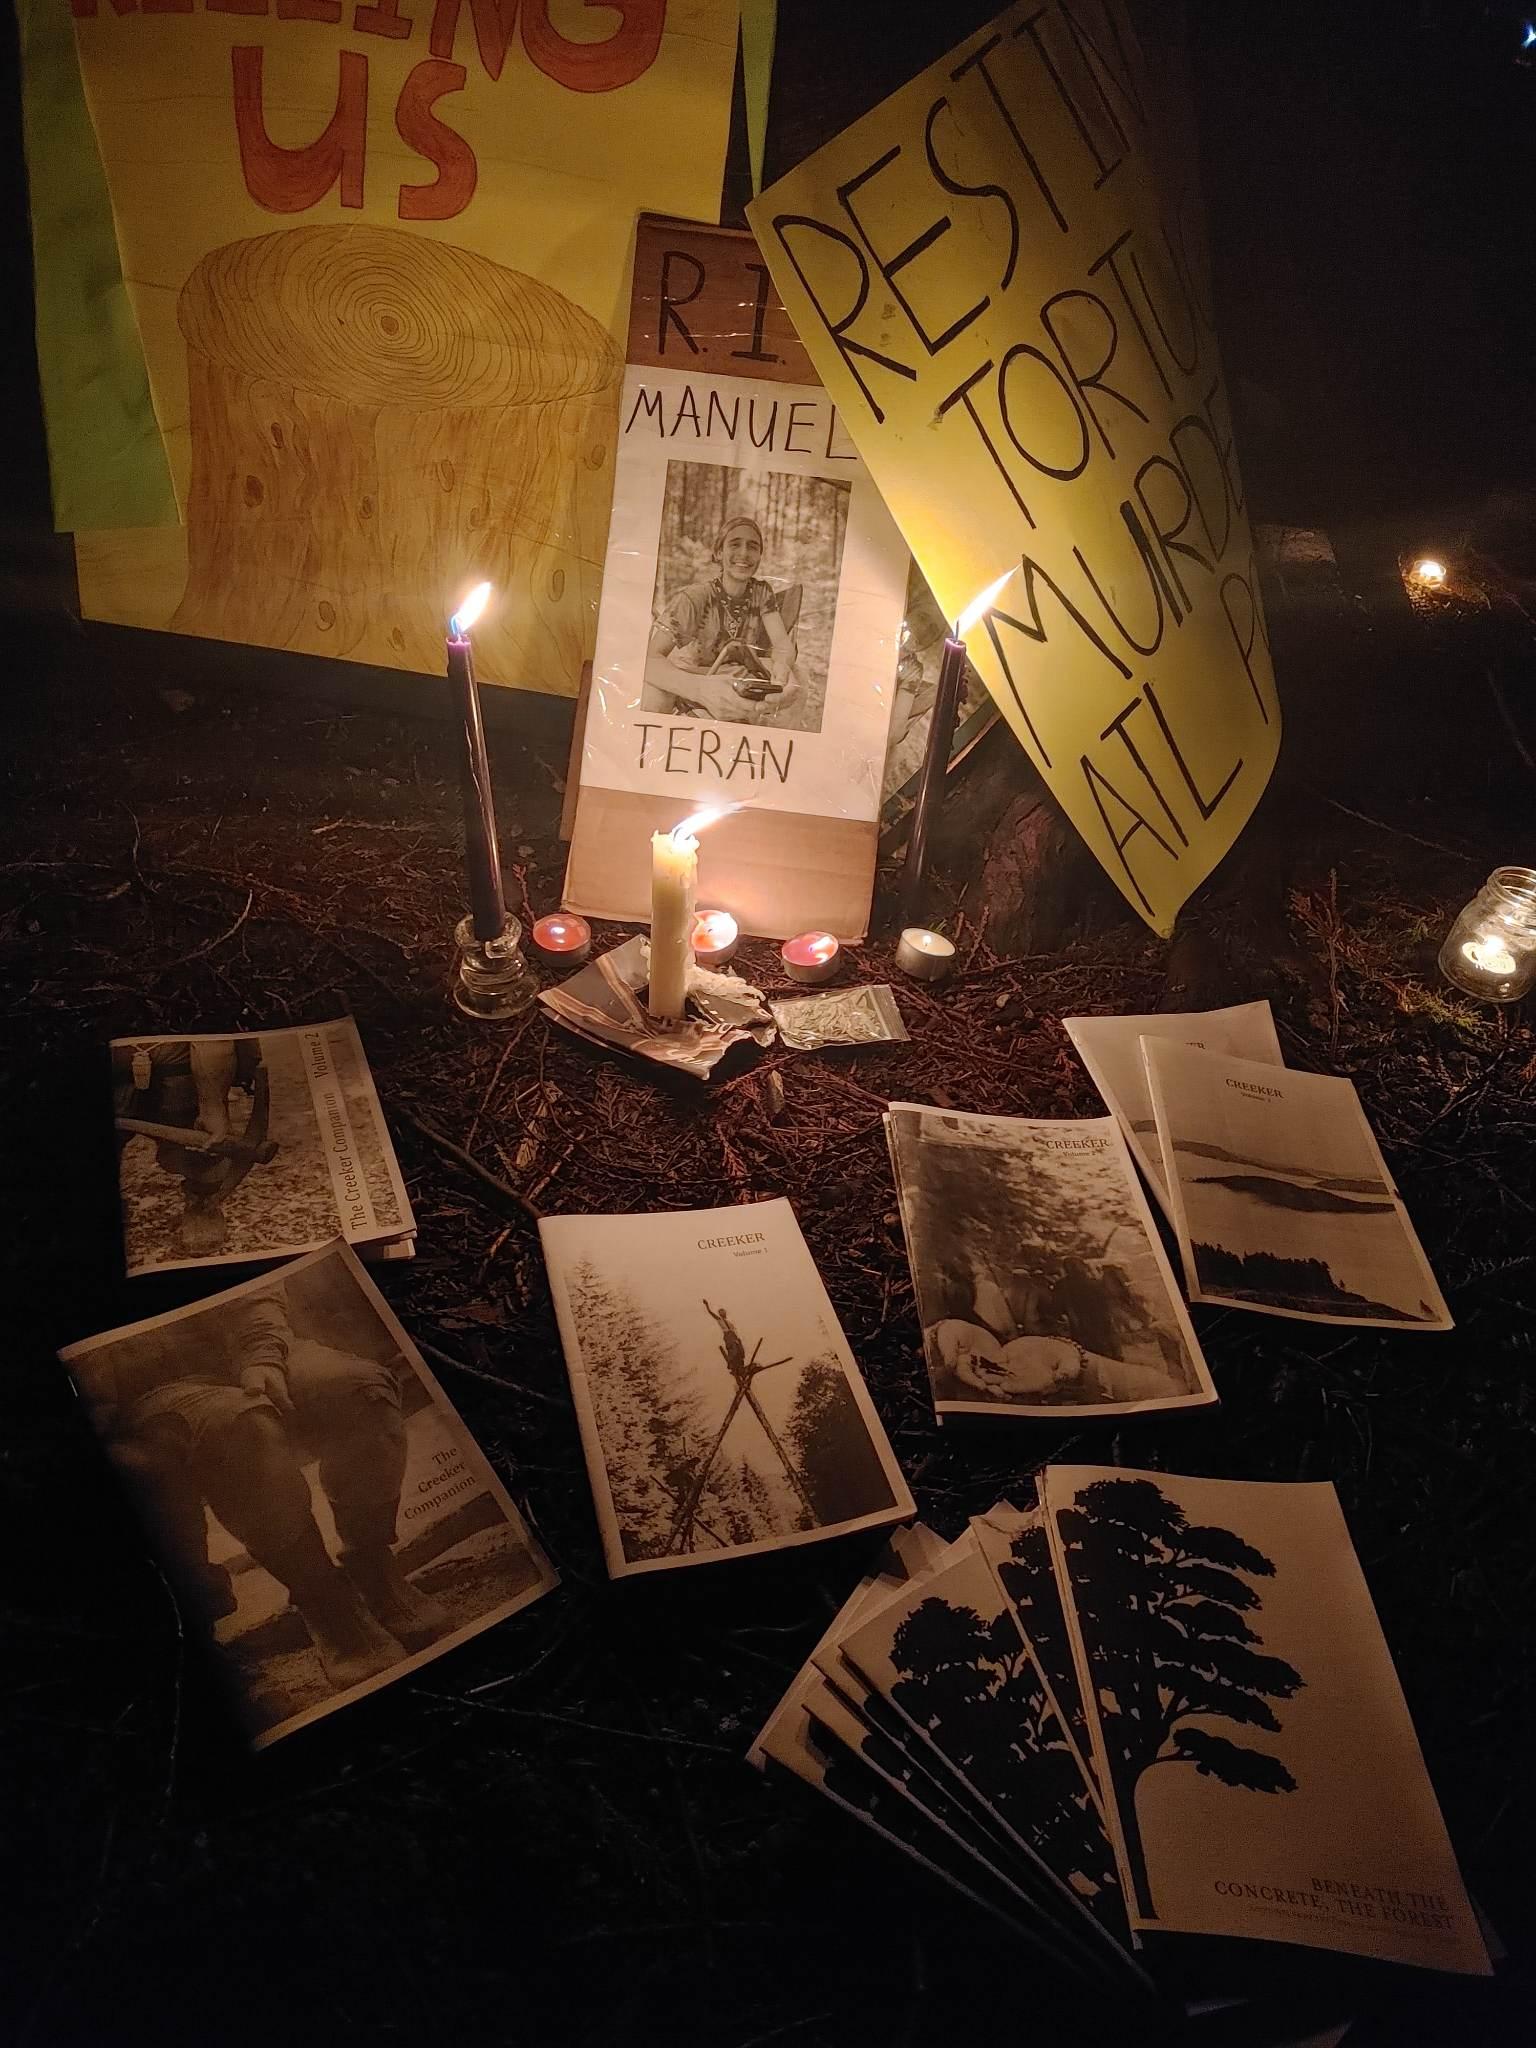 A picture of Tortuguita is lit by several vigil candles. Several zines surround the photo and candles. They include several "Creeker" zines, volumes 1-3. They also include both volume 1 and 2 of "The Creeker Companion." A stack of "Beneath the Concrete, The Forest" zines are also present.